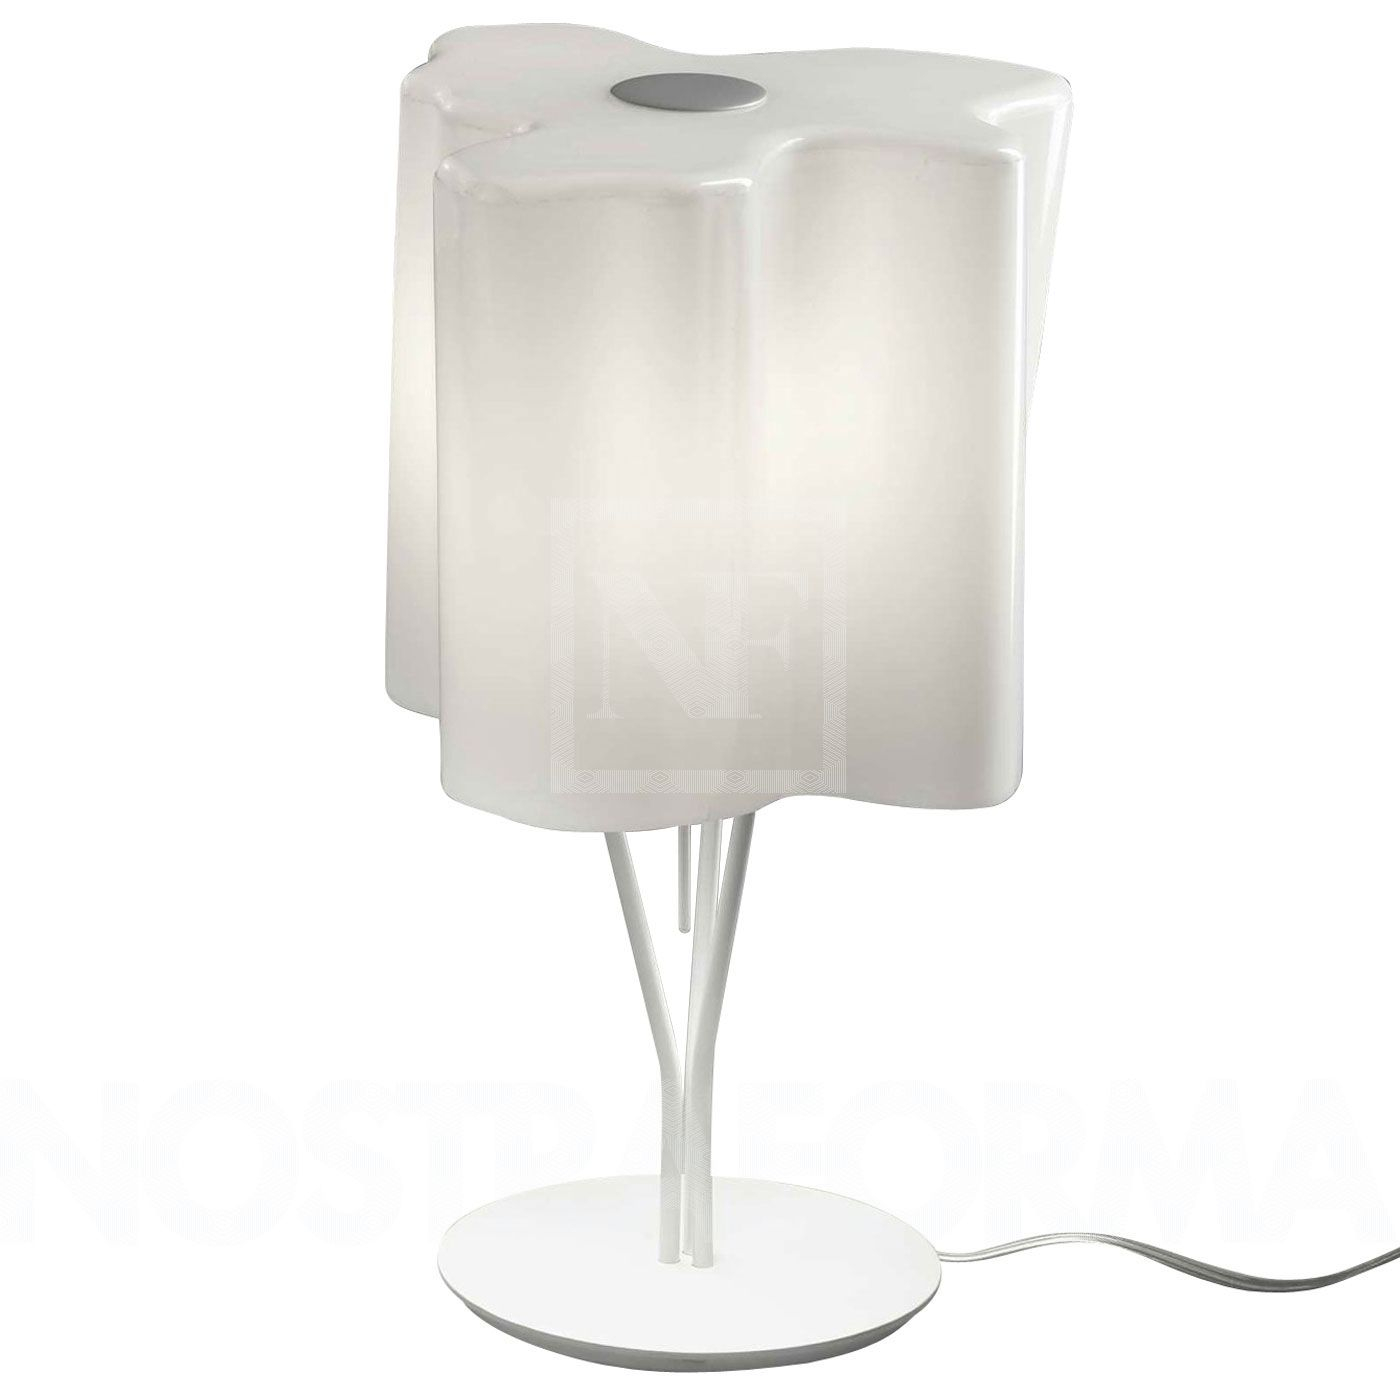 Artemide Logico Table Lamp intended for size 1400 X 1400